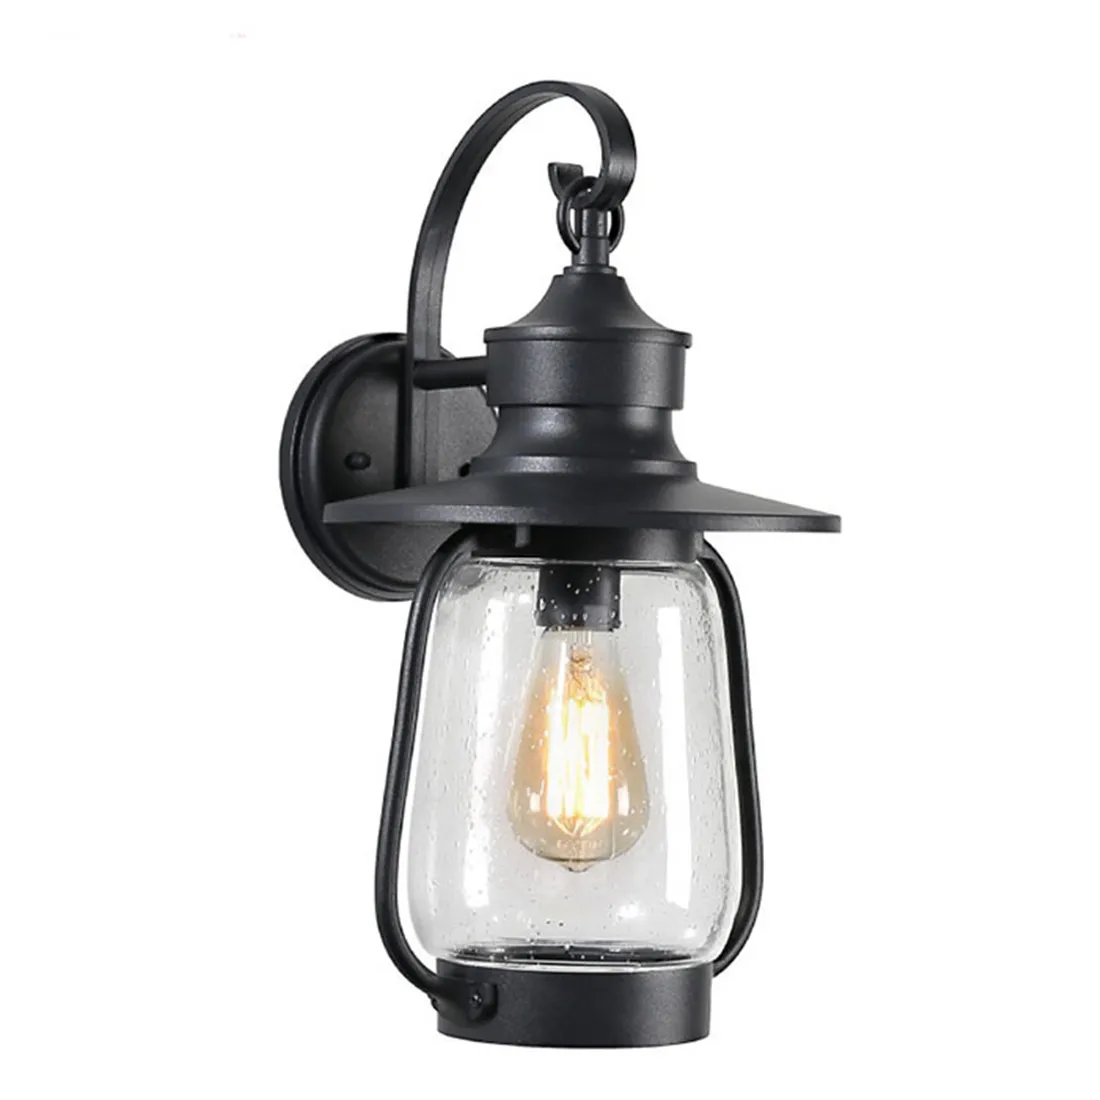 Outdoor Bubble Glass Shade Barn Lights Black Exterior Wall Lantern Outside Wall Mount Scocne Porch Lamp for House Front Door 1pcs free shipping bronze 304 stainless steel shower door pull bathroom glass door push handles towel bar glass mount jf1766